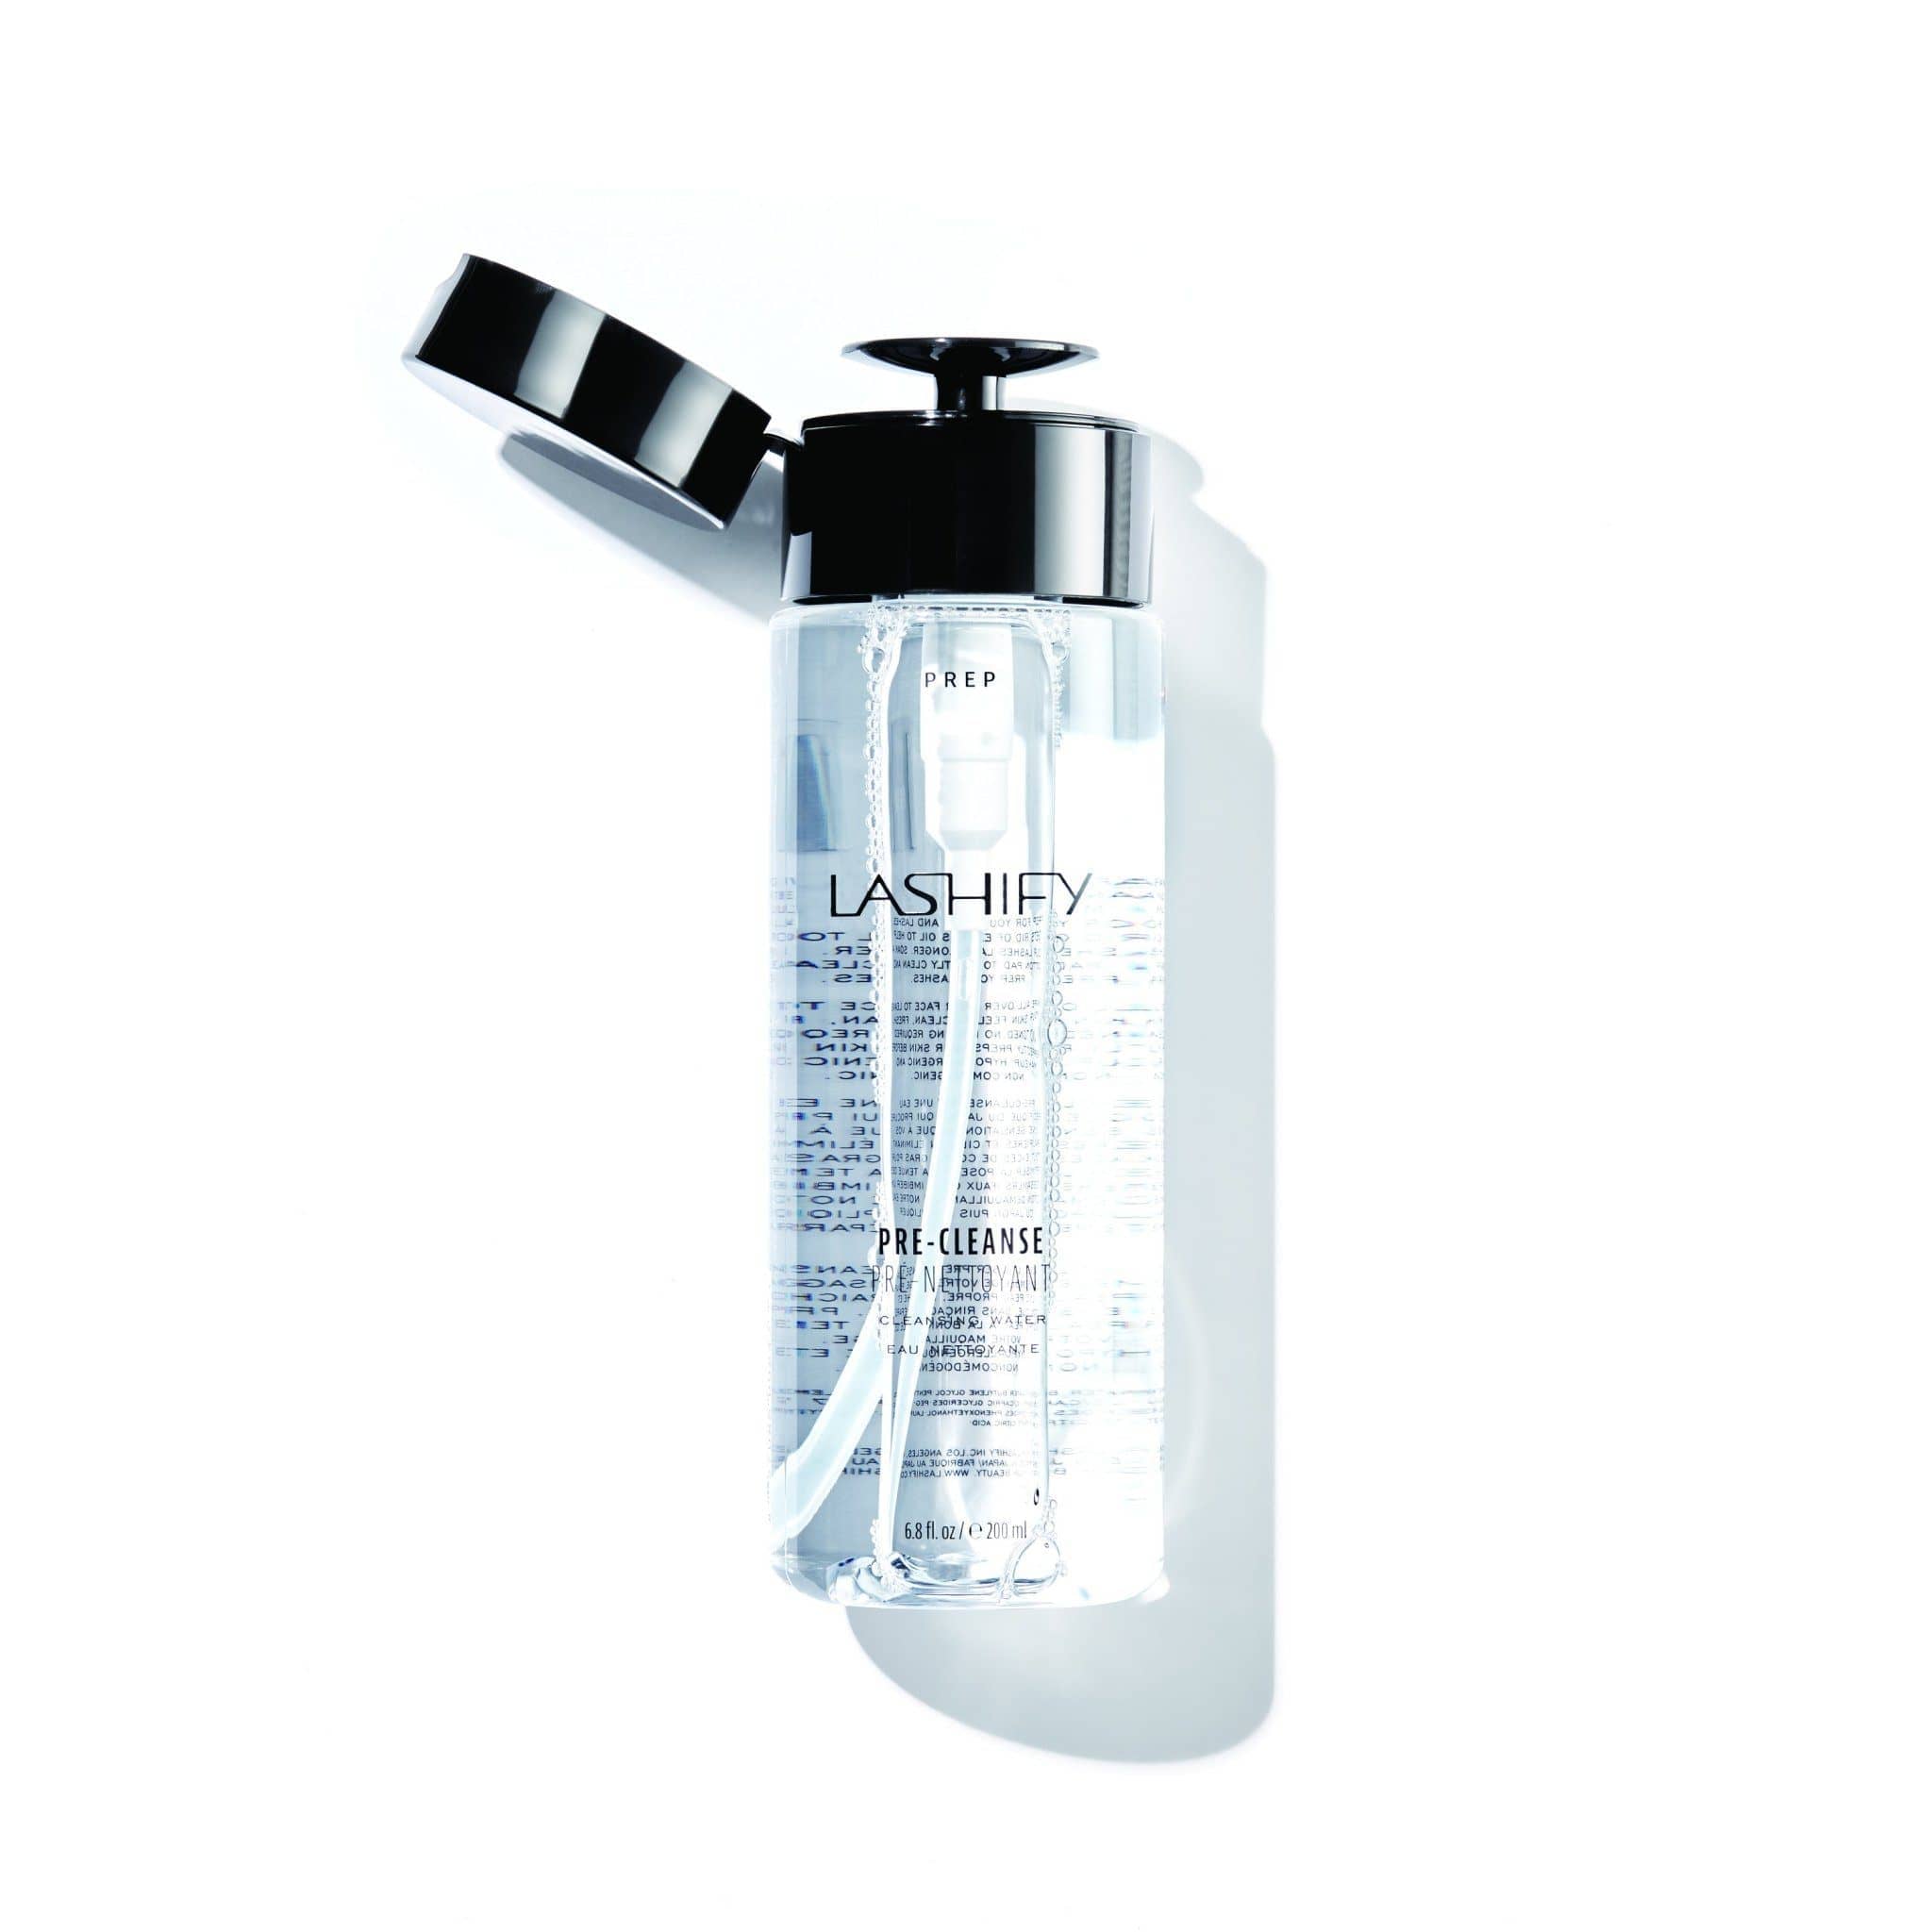 Pre-Cleanse Cleansing Water - Pro Size (200ml)